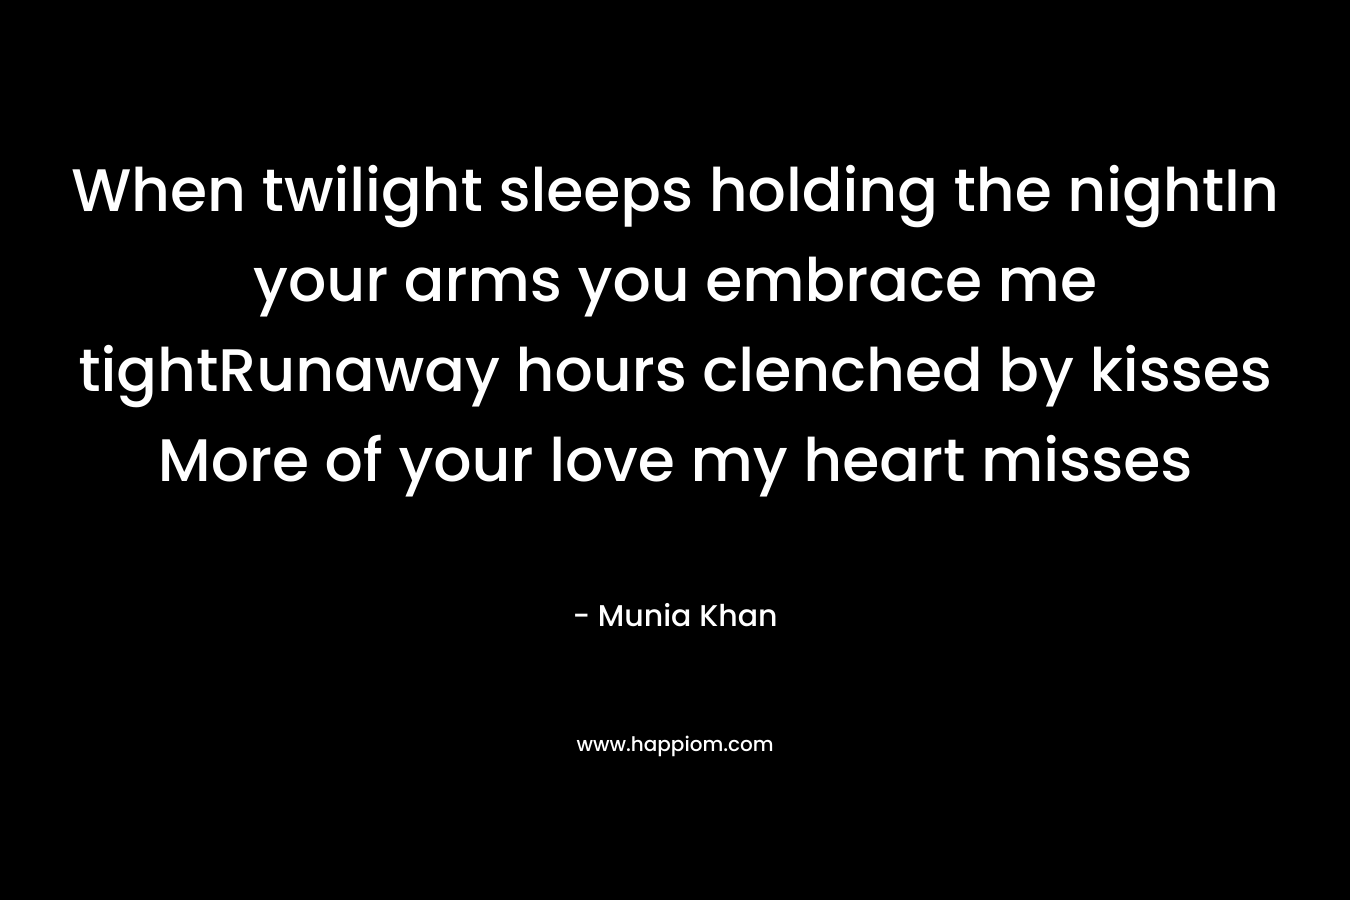 When twilight sleeps holding the nightIn your arms you embrace me tightRunaway hours clenched by kisses More of your love my heart misses – Munia Khan